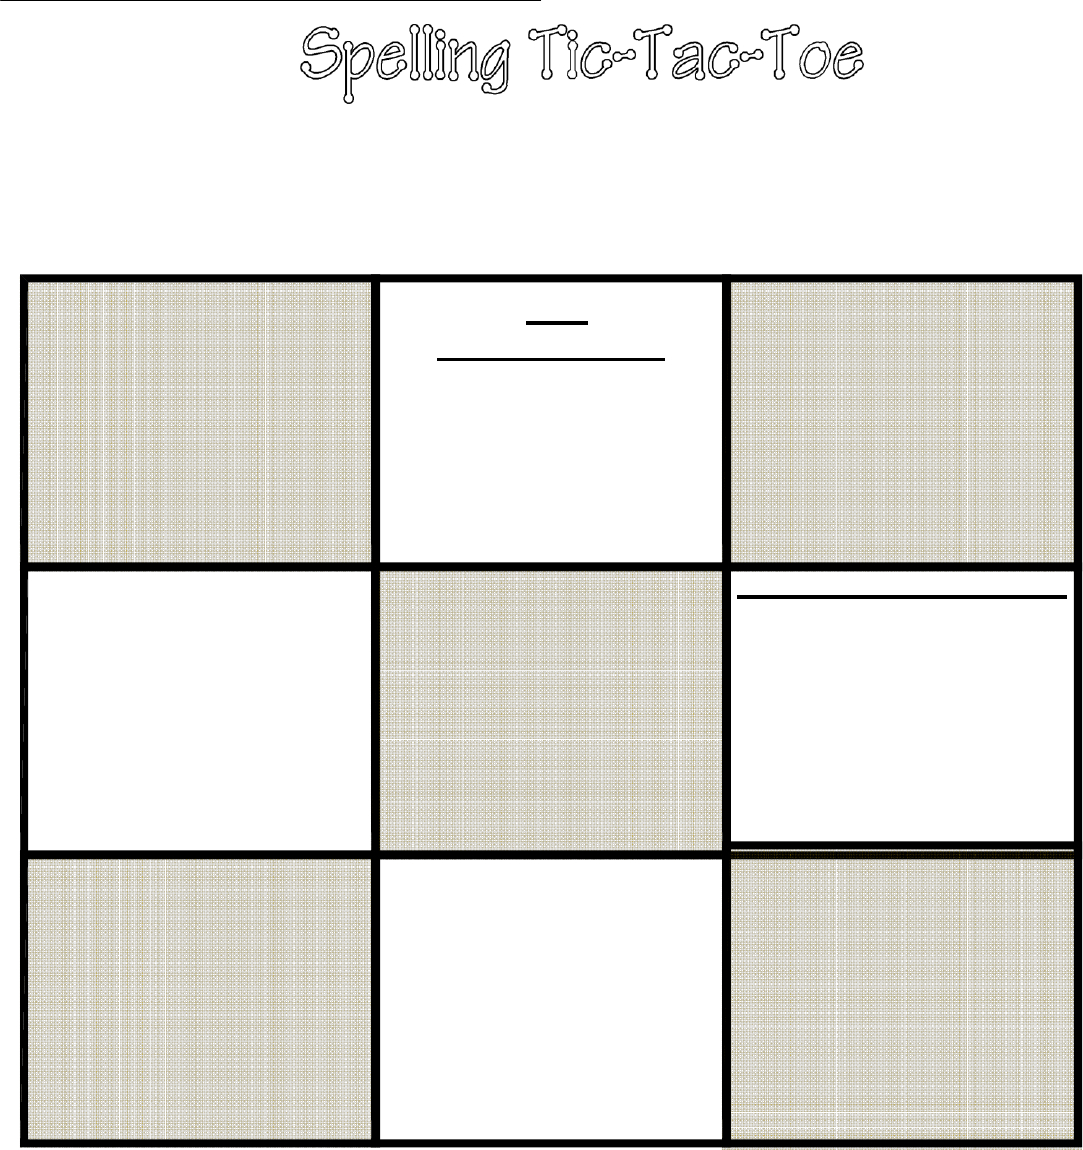 Tic Tac Toe Template In Word And Pdf Formats Inside Tic Tac Toe Template Word